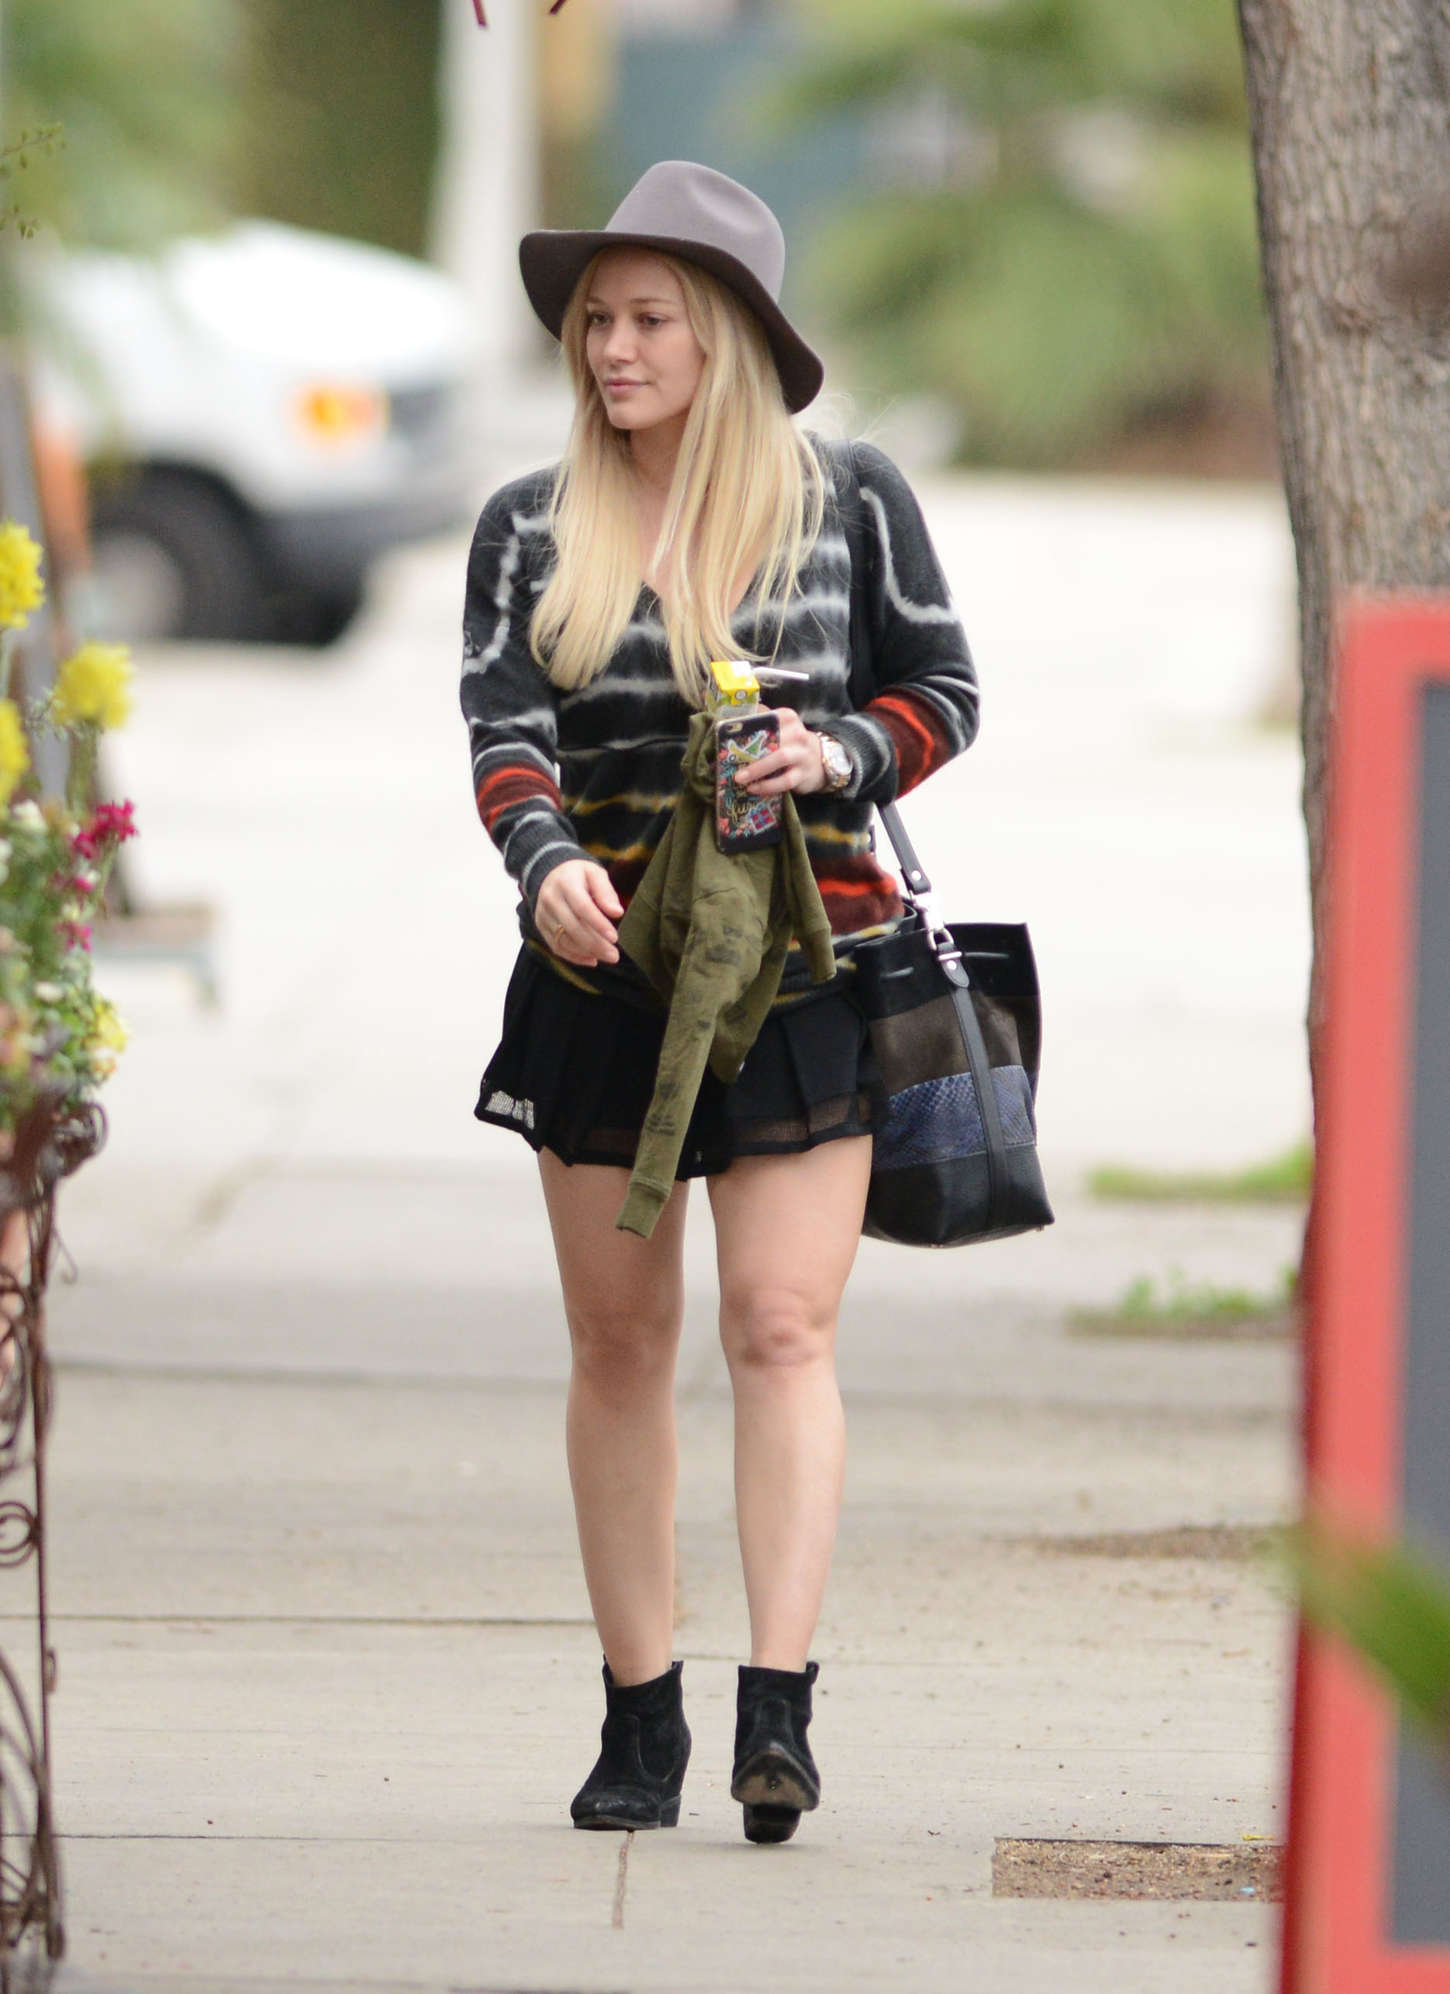 Hilary Duff in Mini Skirt Out with her son in LA